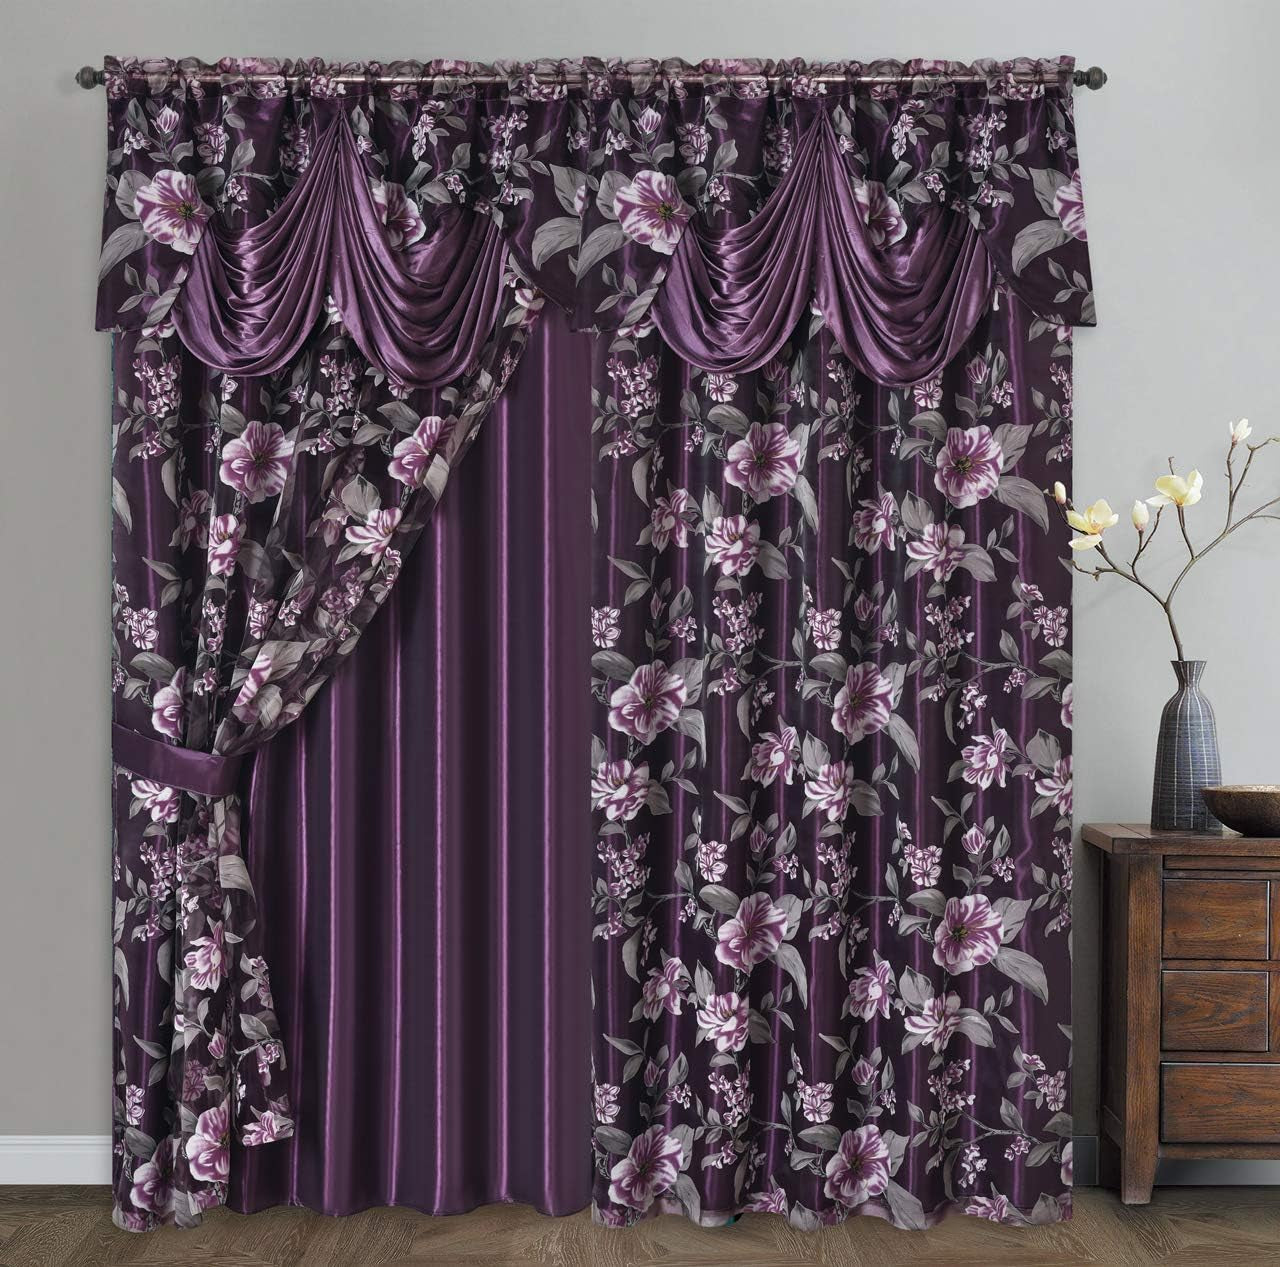 GOHD Roman Romance. Burnt-Out Printed Organza Window Curtain Panel Drape with Attached Fancy Valance and Taffeta Backing (Purple, 55 X 84 Inches + Attached Valance X 2Pcs)